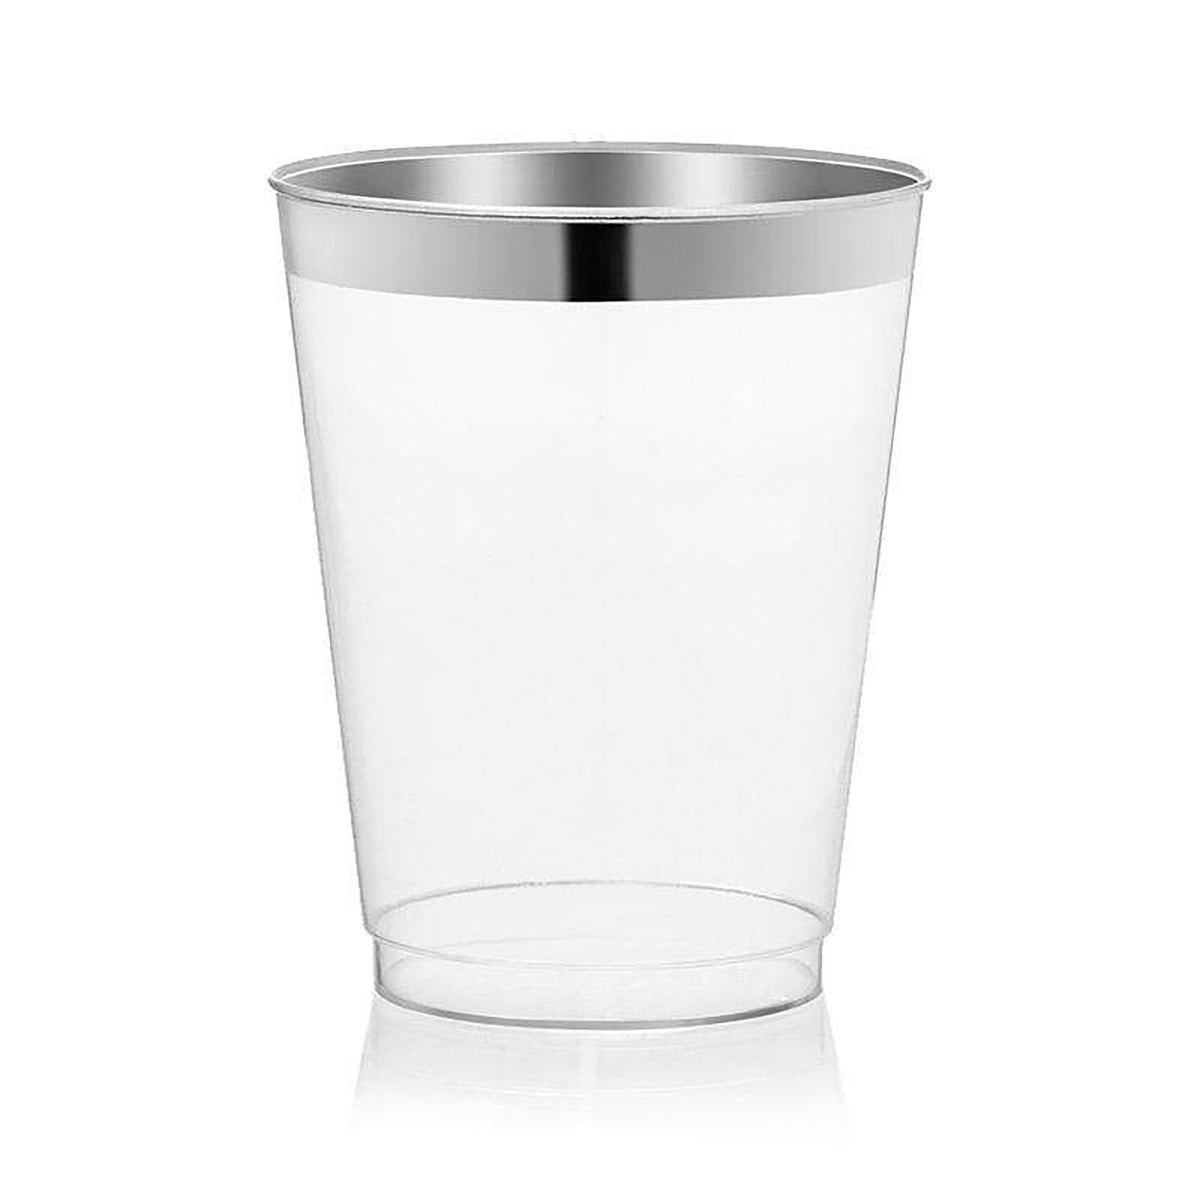 https://www.smartyhadapartyshop.shop/wp-content/uploads/1692/97/explore-our-range-to-find-products-from-10-oz-clear-with-metallic-silver-rim-round-tumblers-kaya-collection-at-reasonable-costs_0.jpg